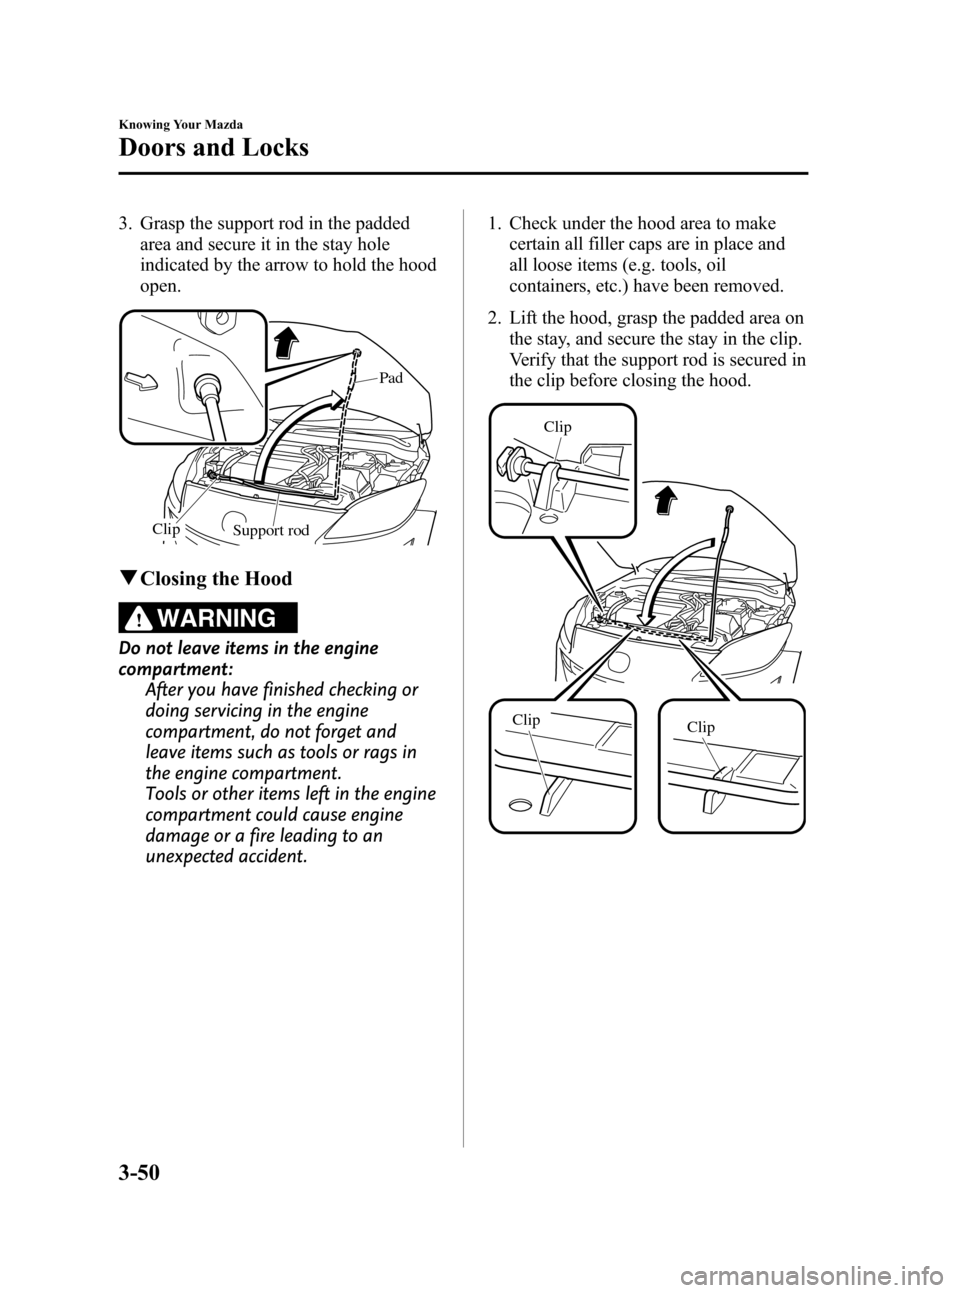 MAZDA MODEL 3 HATCHBACK 2012  Owners Manual (in English) Black plate (128,1)
3. Grasp the support rod in the paddedarea and secure it in the stay hole
indicated by the arrow to hold the hood
open.
Support rod
Clip Pad
q
Closing the Hood
WARNING
Do not leave